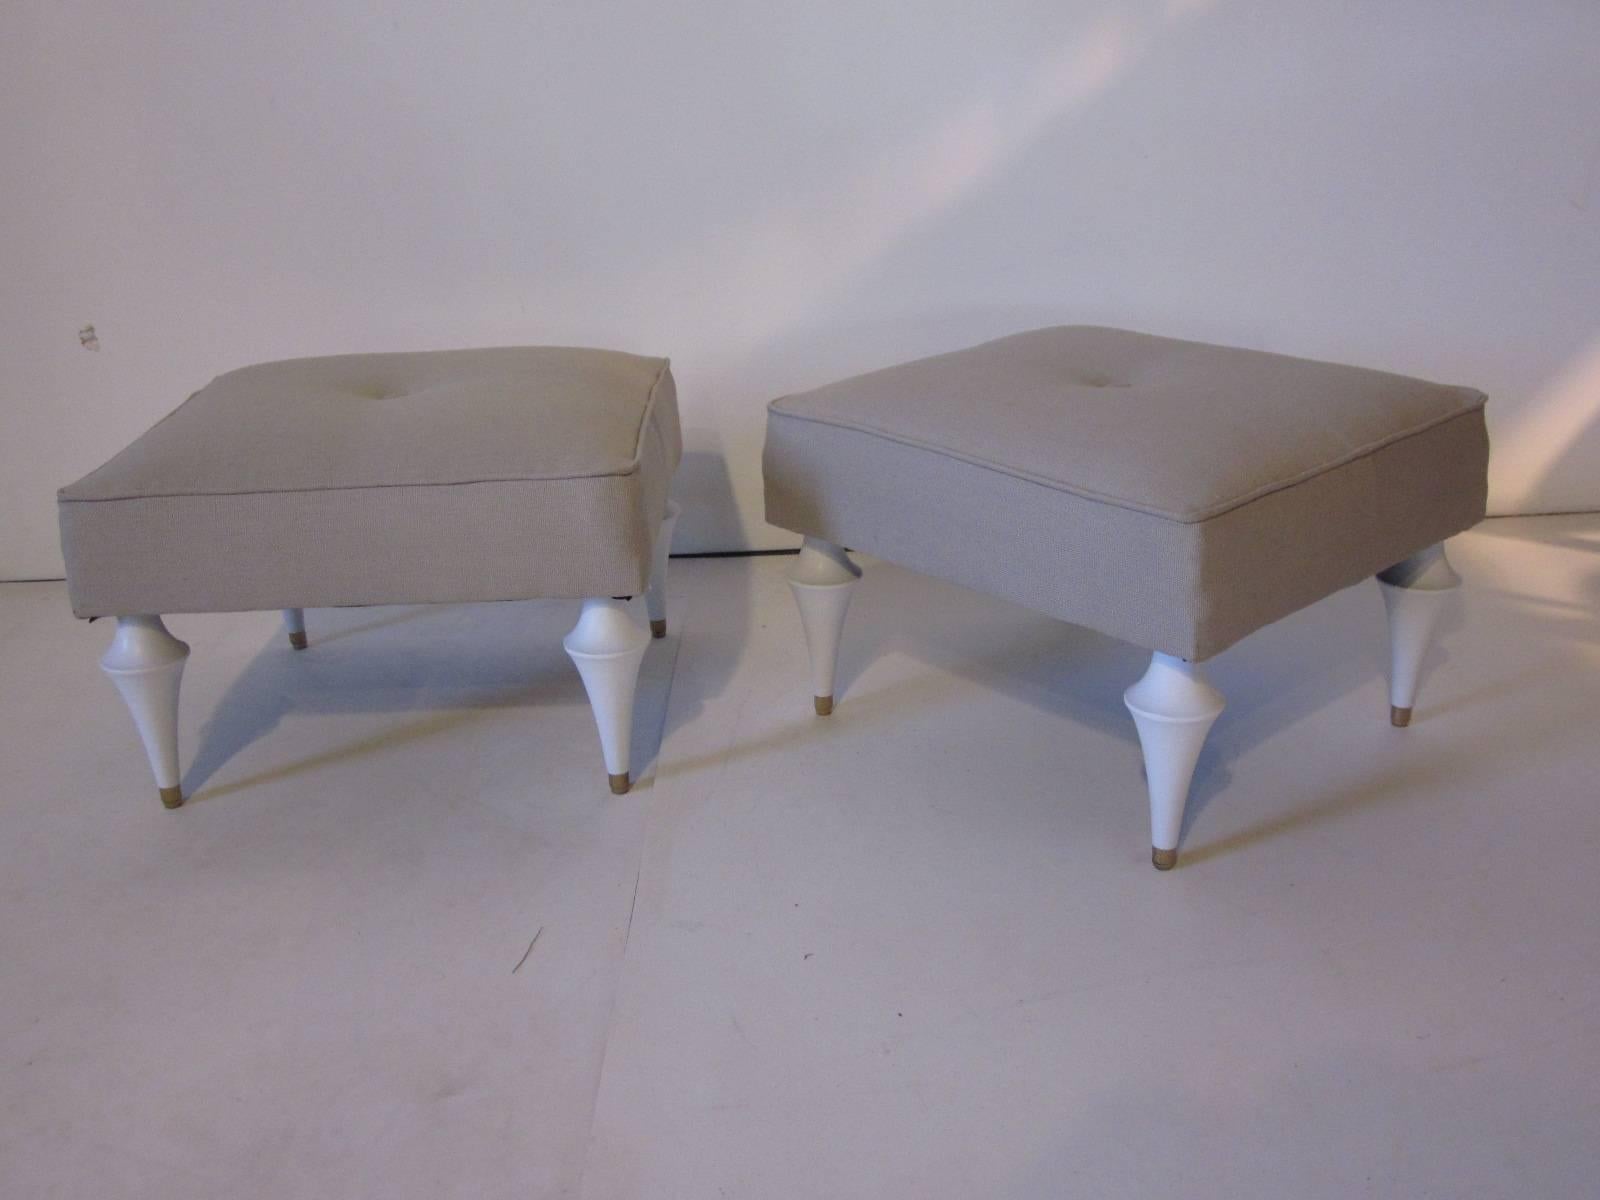 A pair of matching smaller petite sized footstools upholstered in an Italian linen with turned white wood legs tipped in a brass finish in the style of Tommi Parzinger.